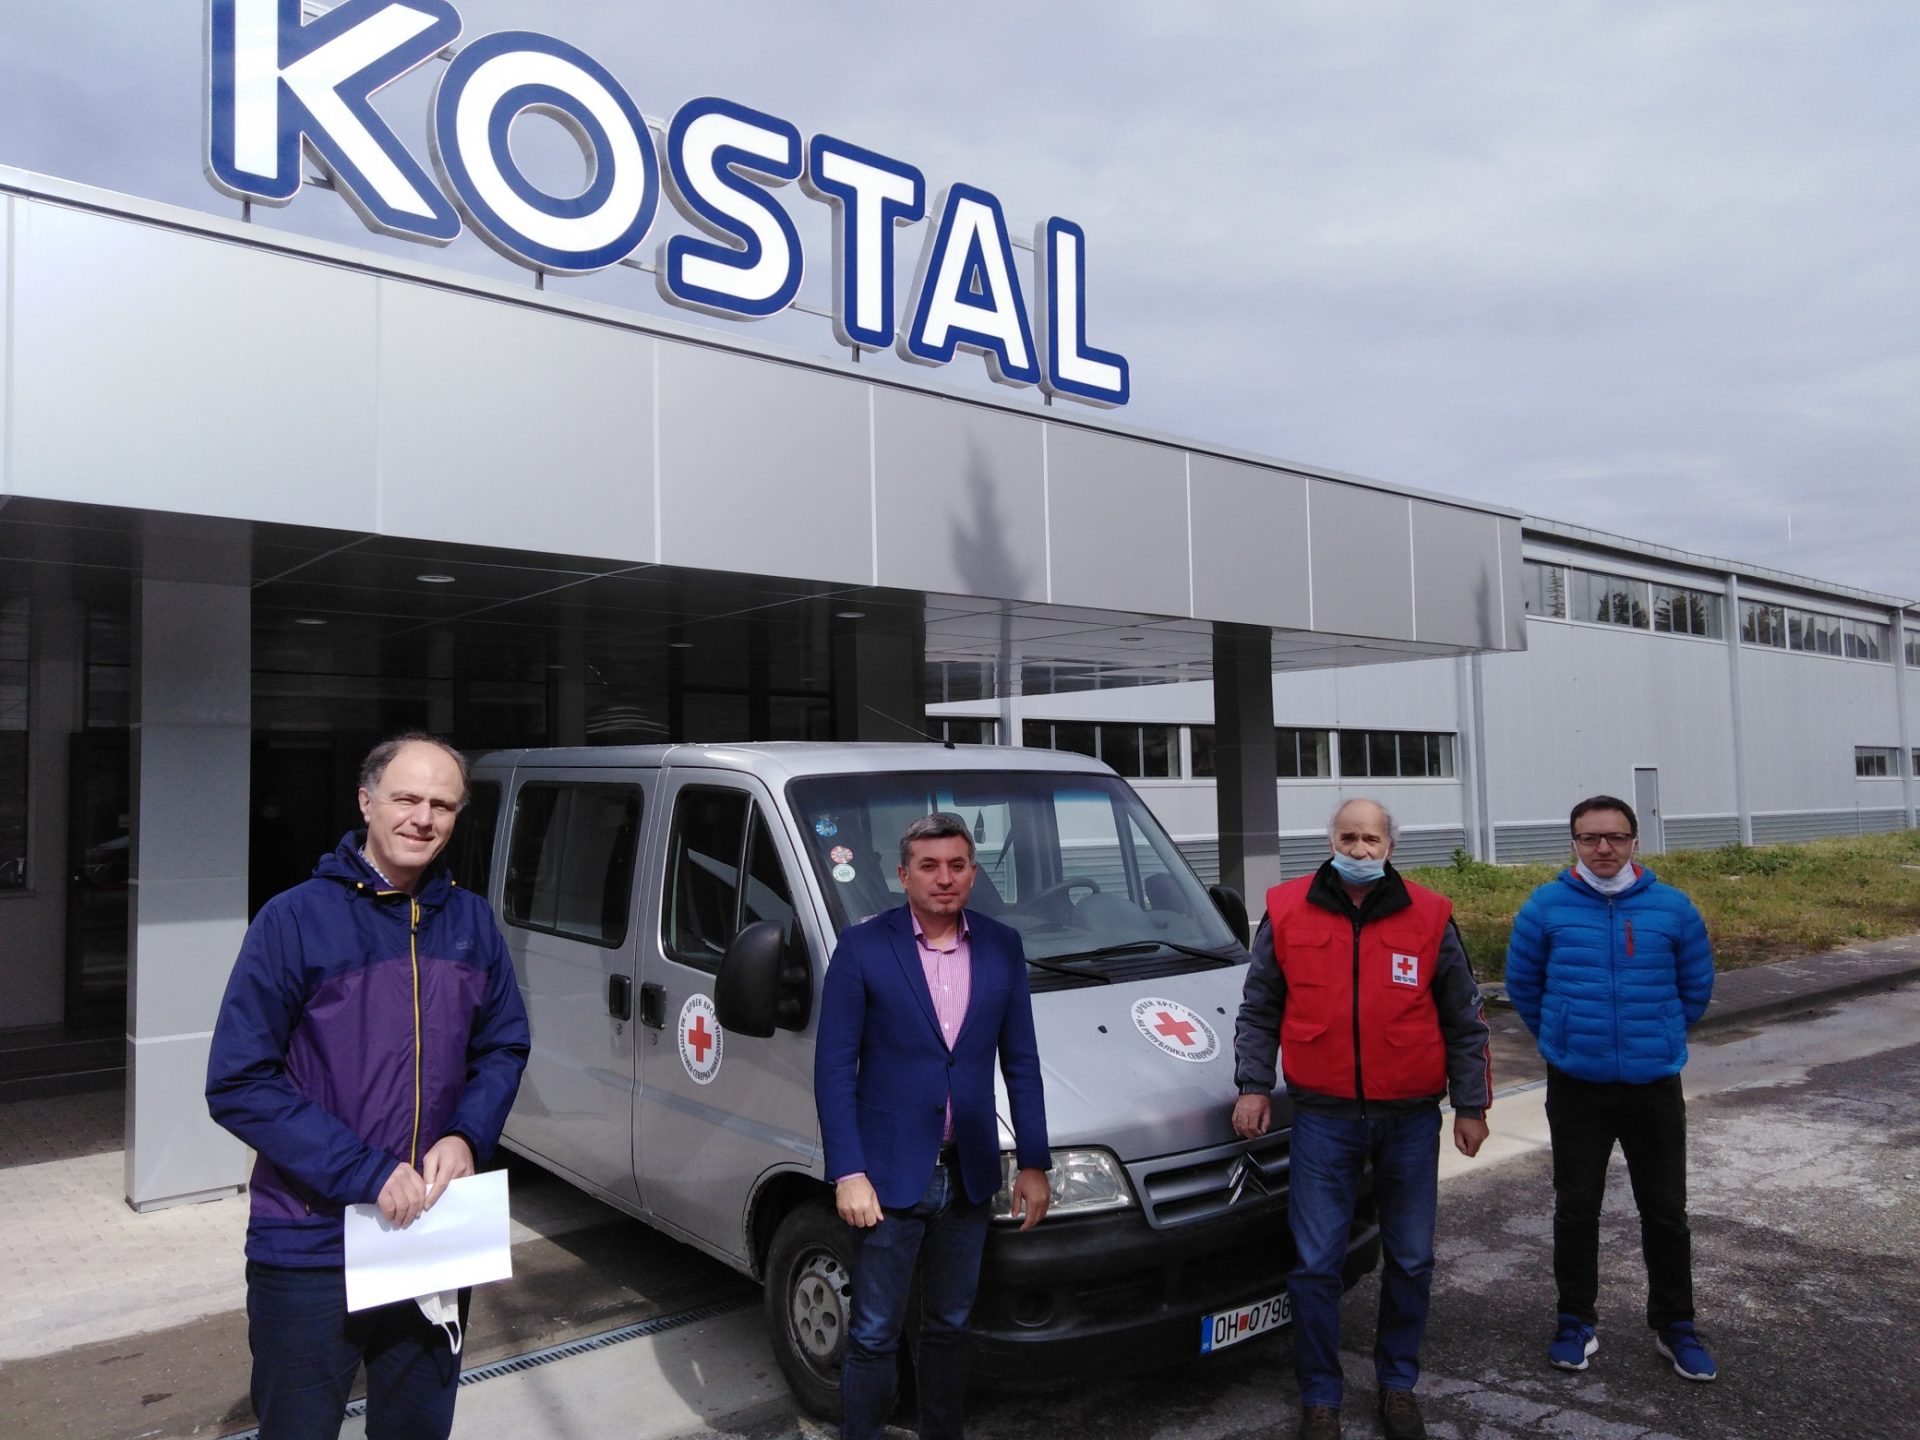 Kostal Macedonia Dooel Ohrid granted a donation to the public health and the red cross ohrid